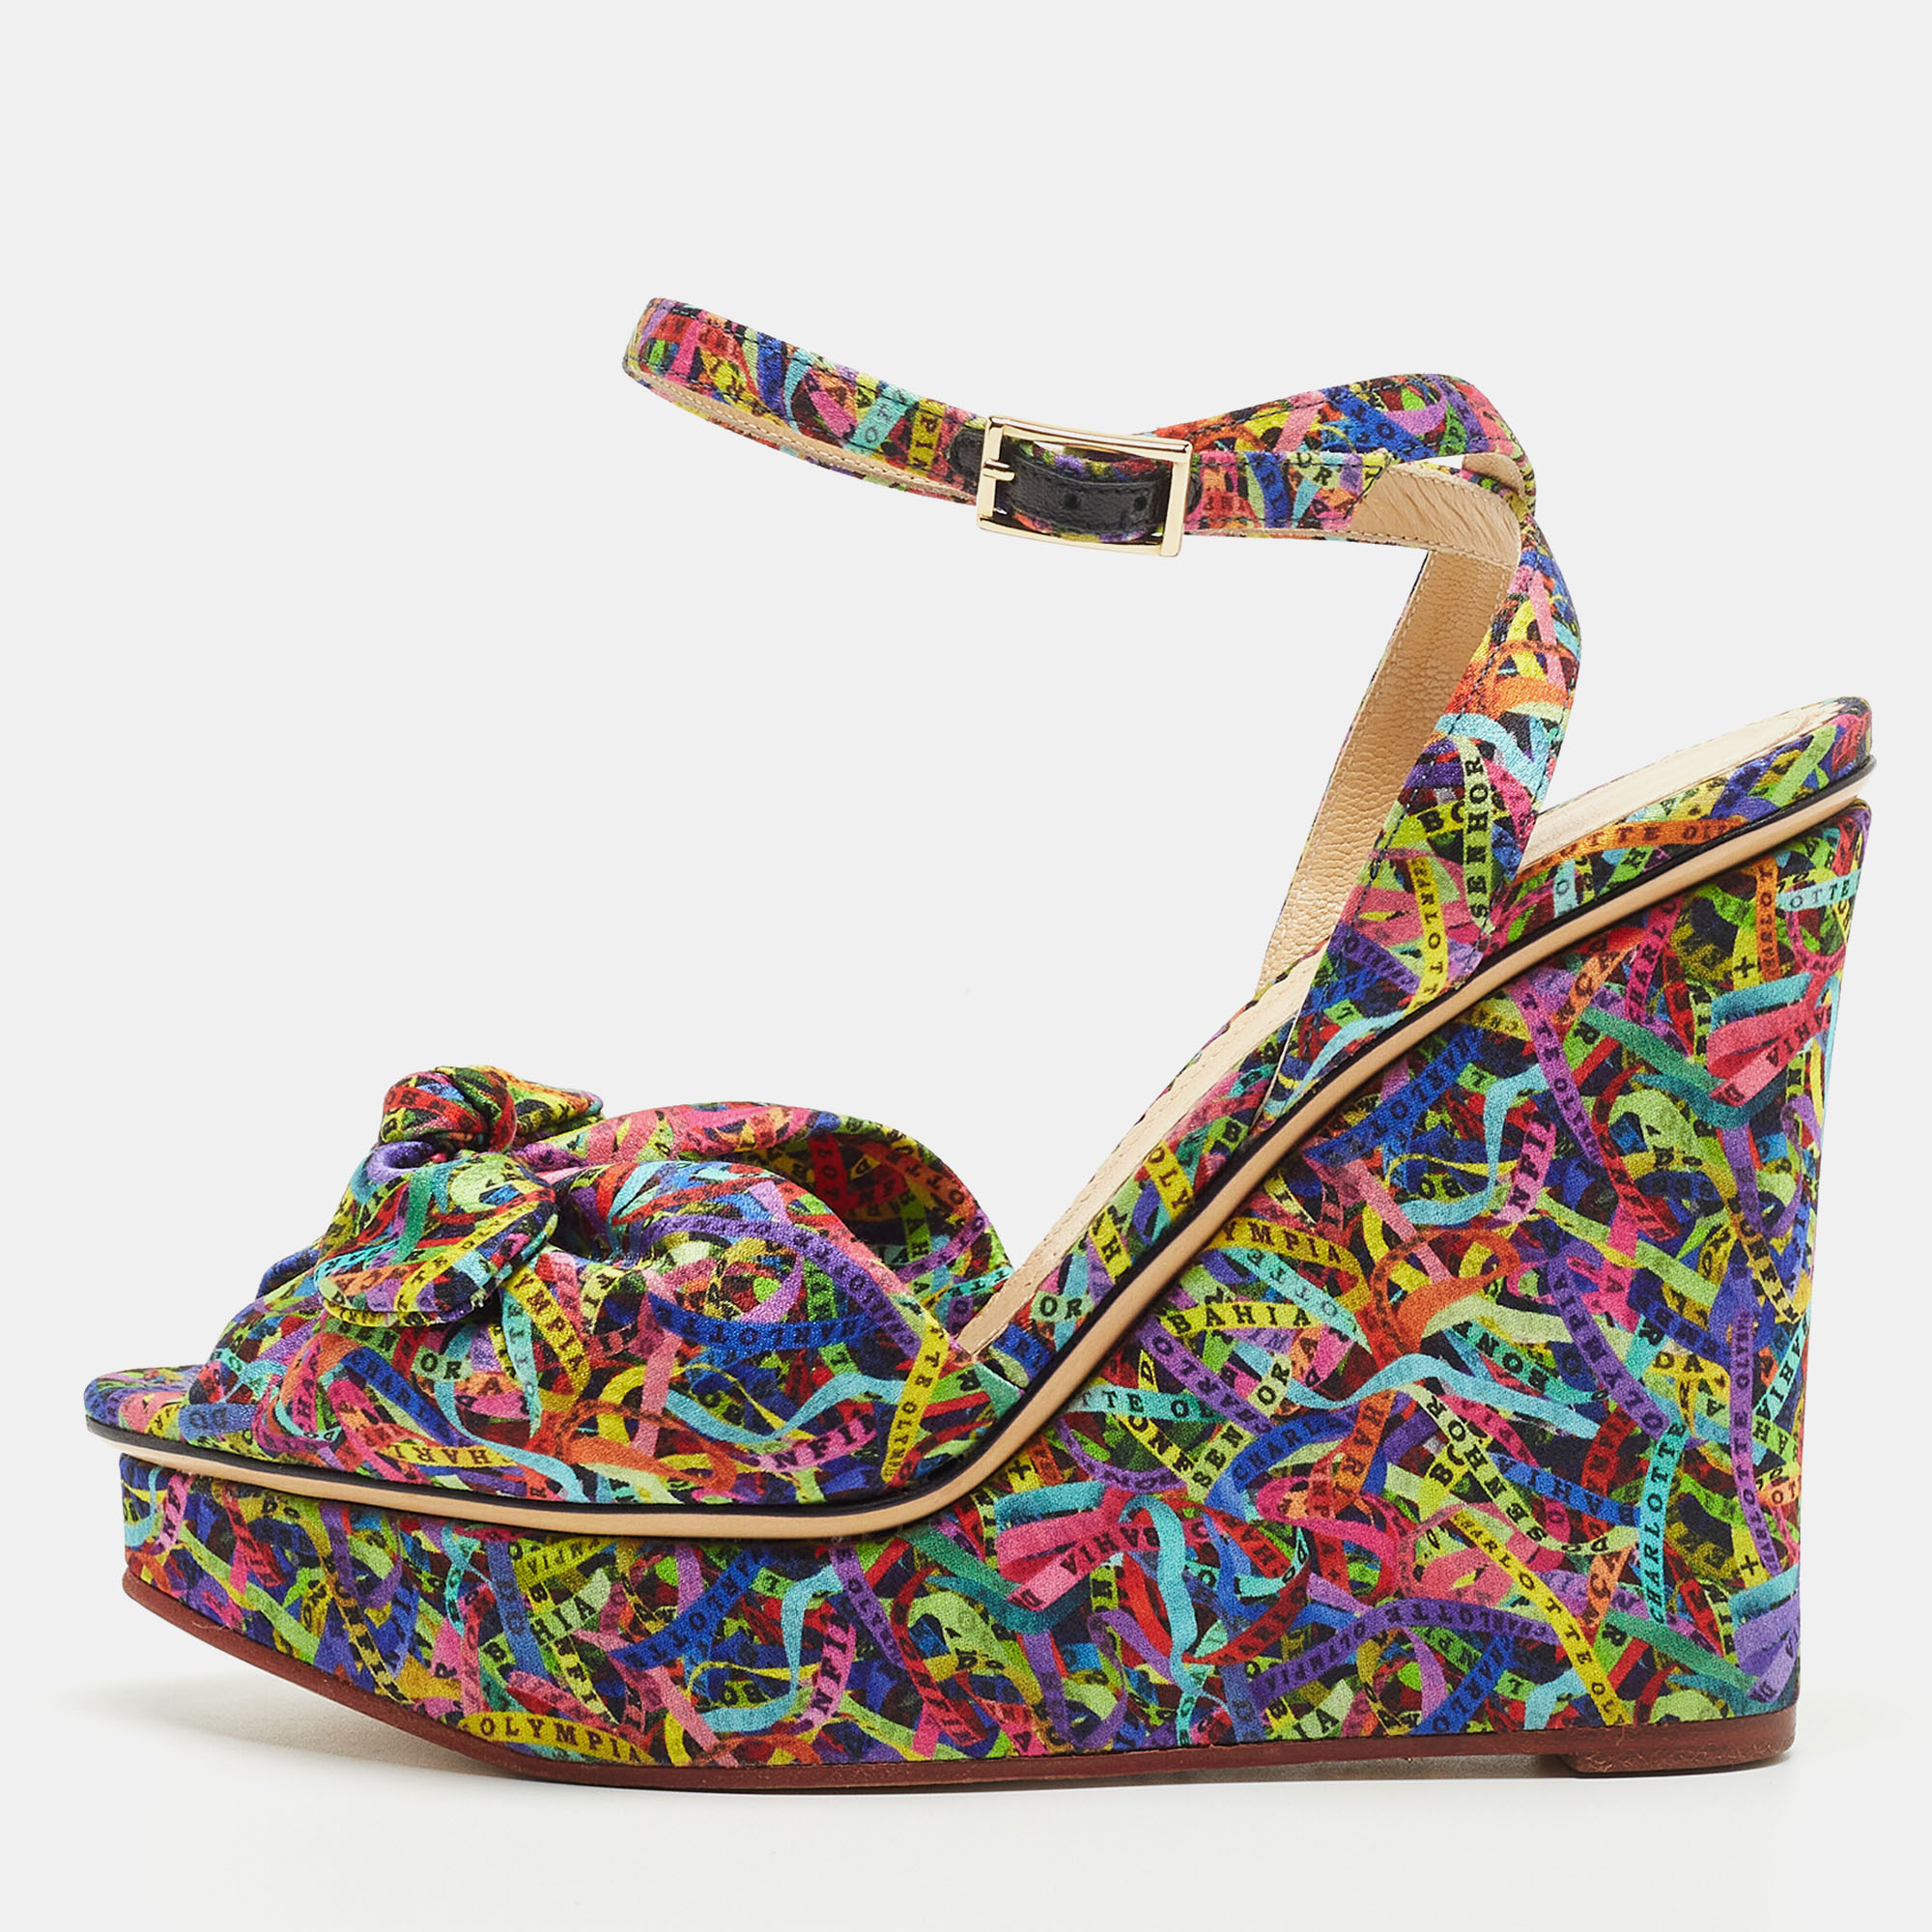 Charlotte Olympia Multicolor Printed Satin Wedge Platform Ankle Strap Sandals Size 38